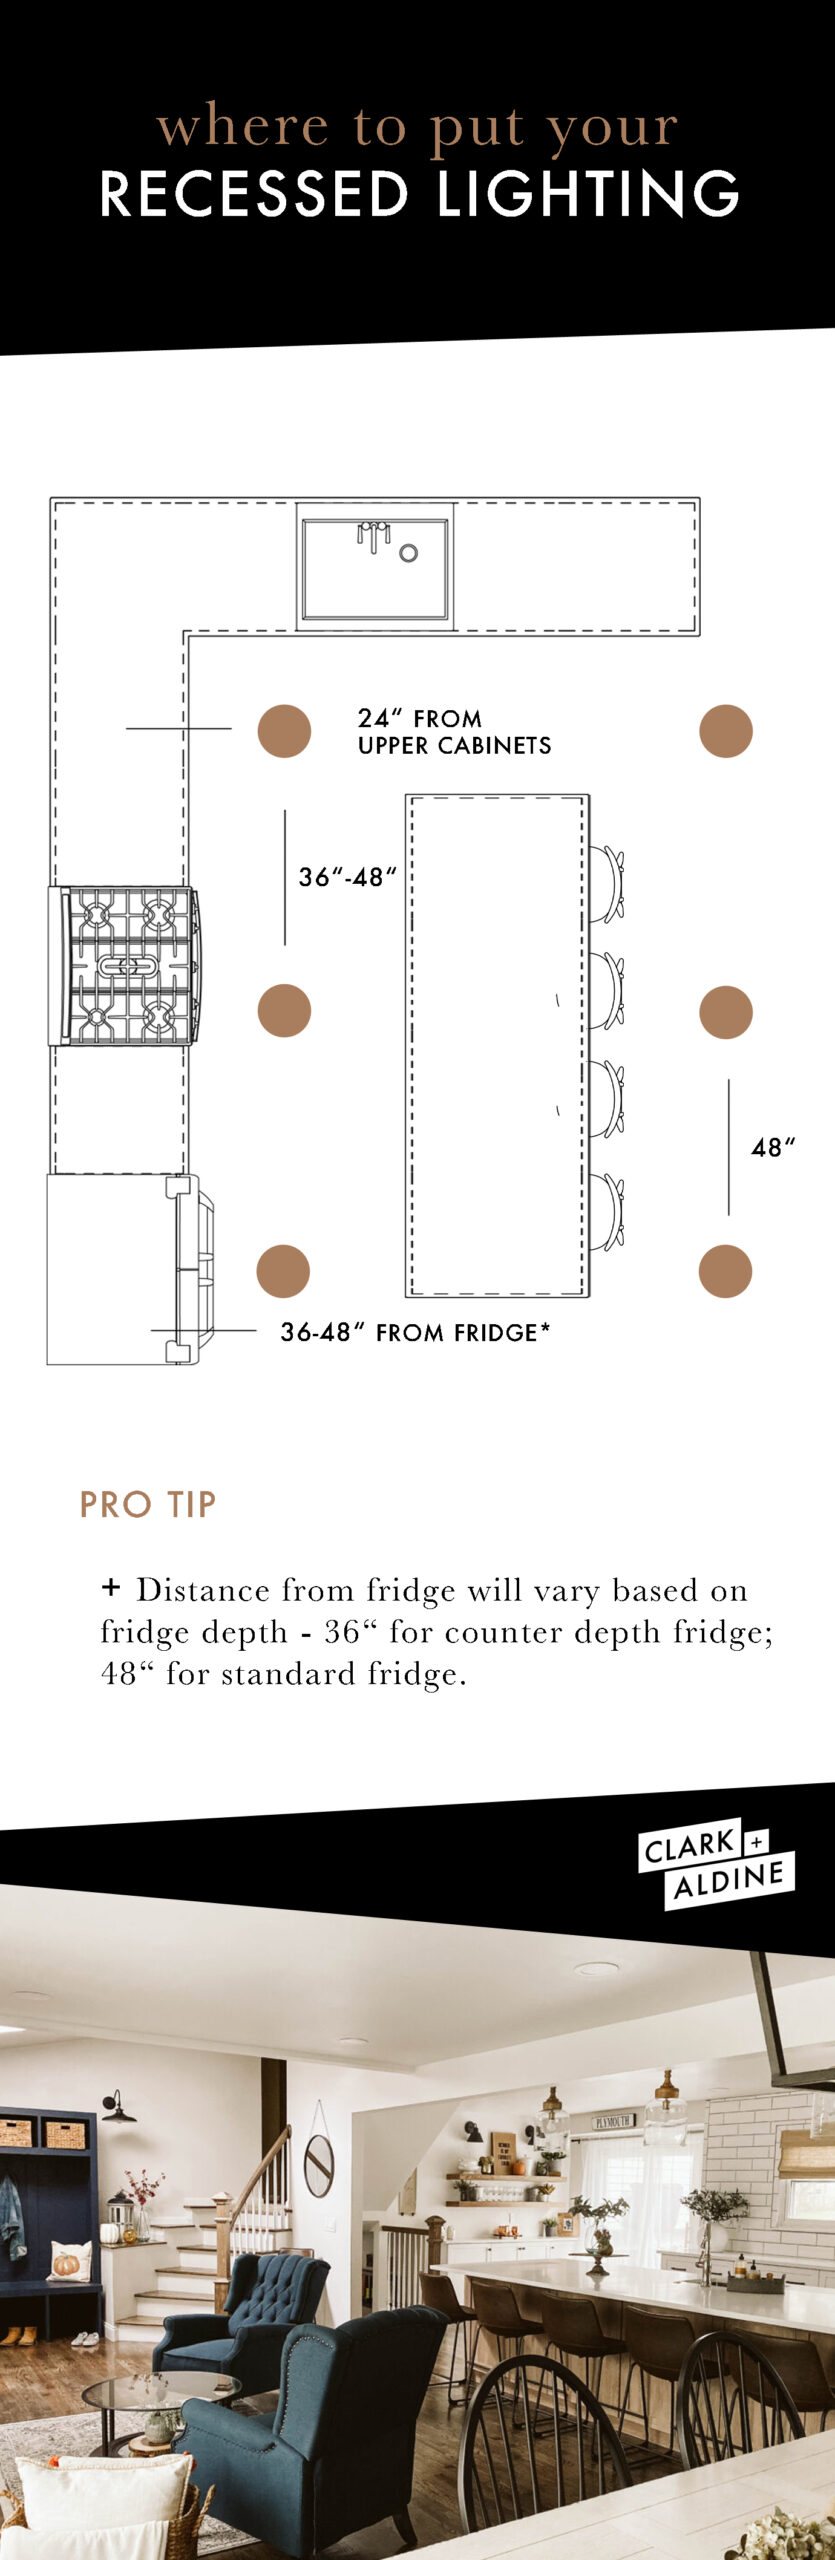 HOW TO PLACE YOUR RECESSED LIGHTING image 1